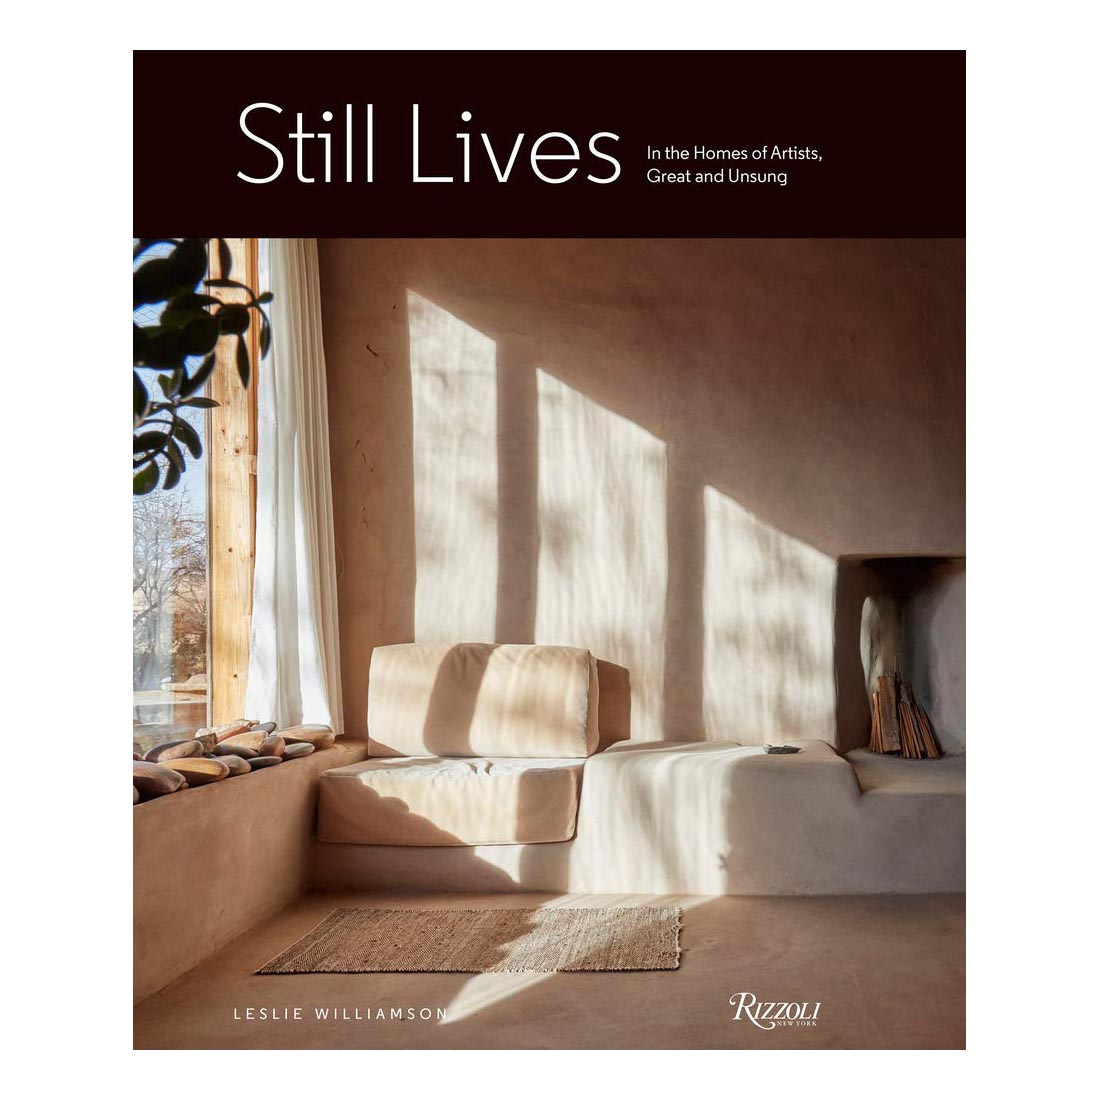 Still Lives: In the Homes of Artists